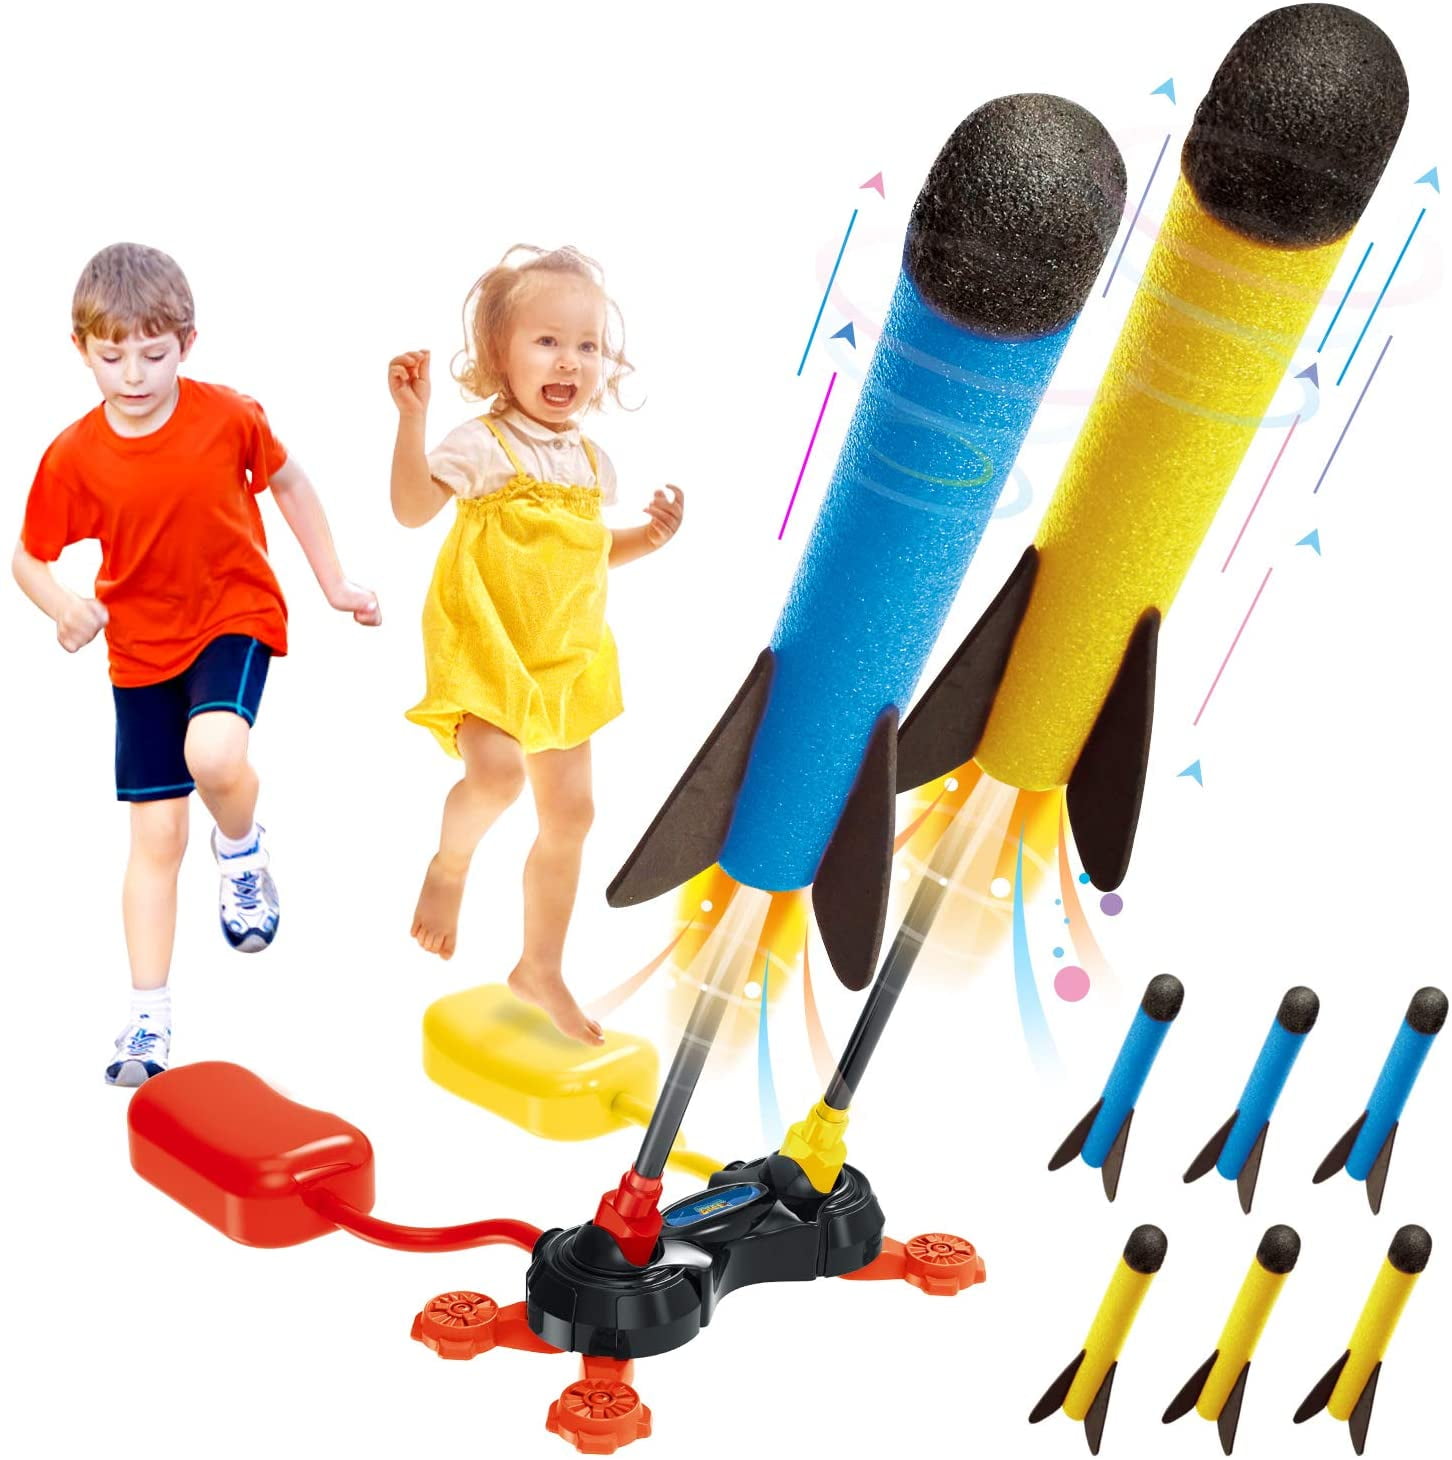 Toy Rocket Launcher Jump Rocket Set with 6 Rockets with Glow Flashing Lights 